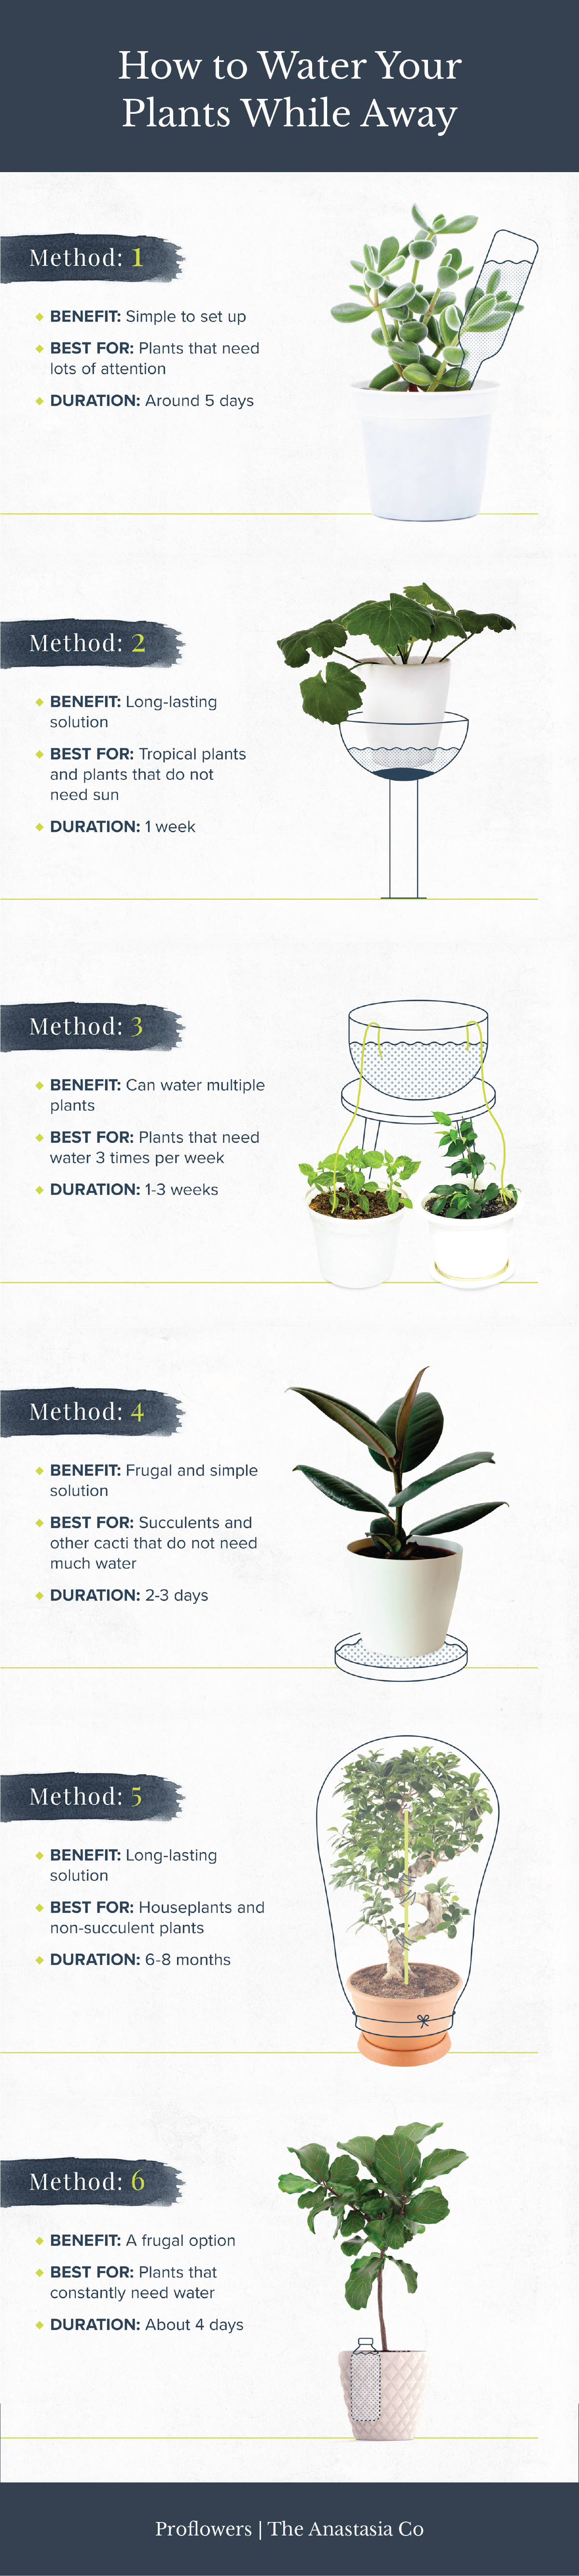 Plant Watering Infographic